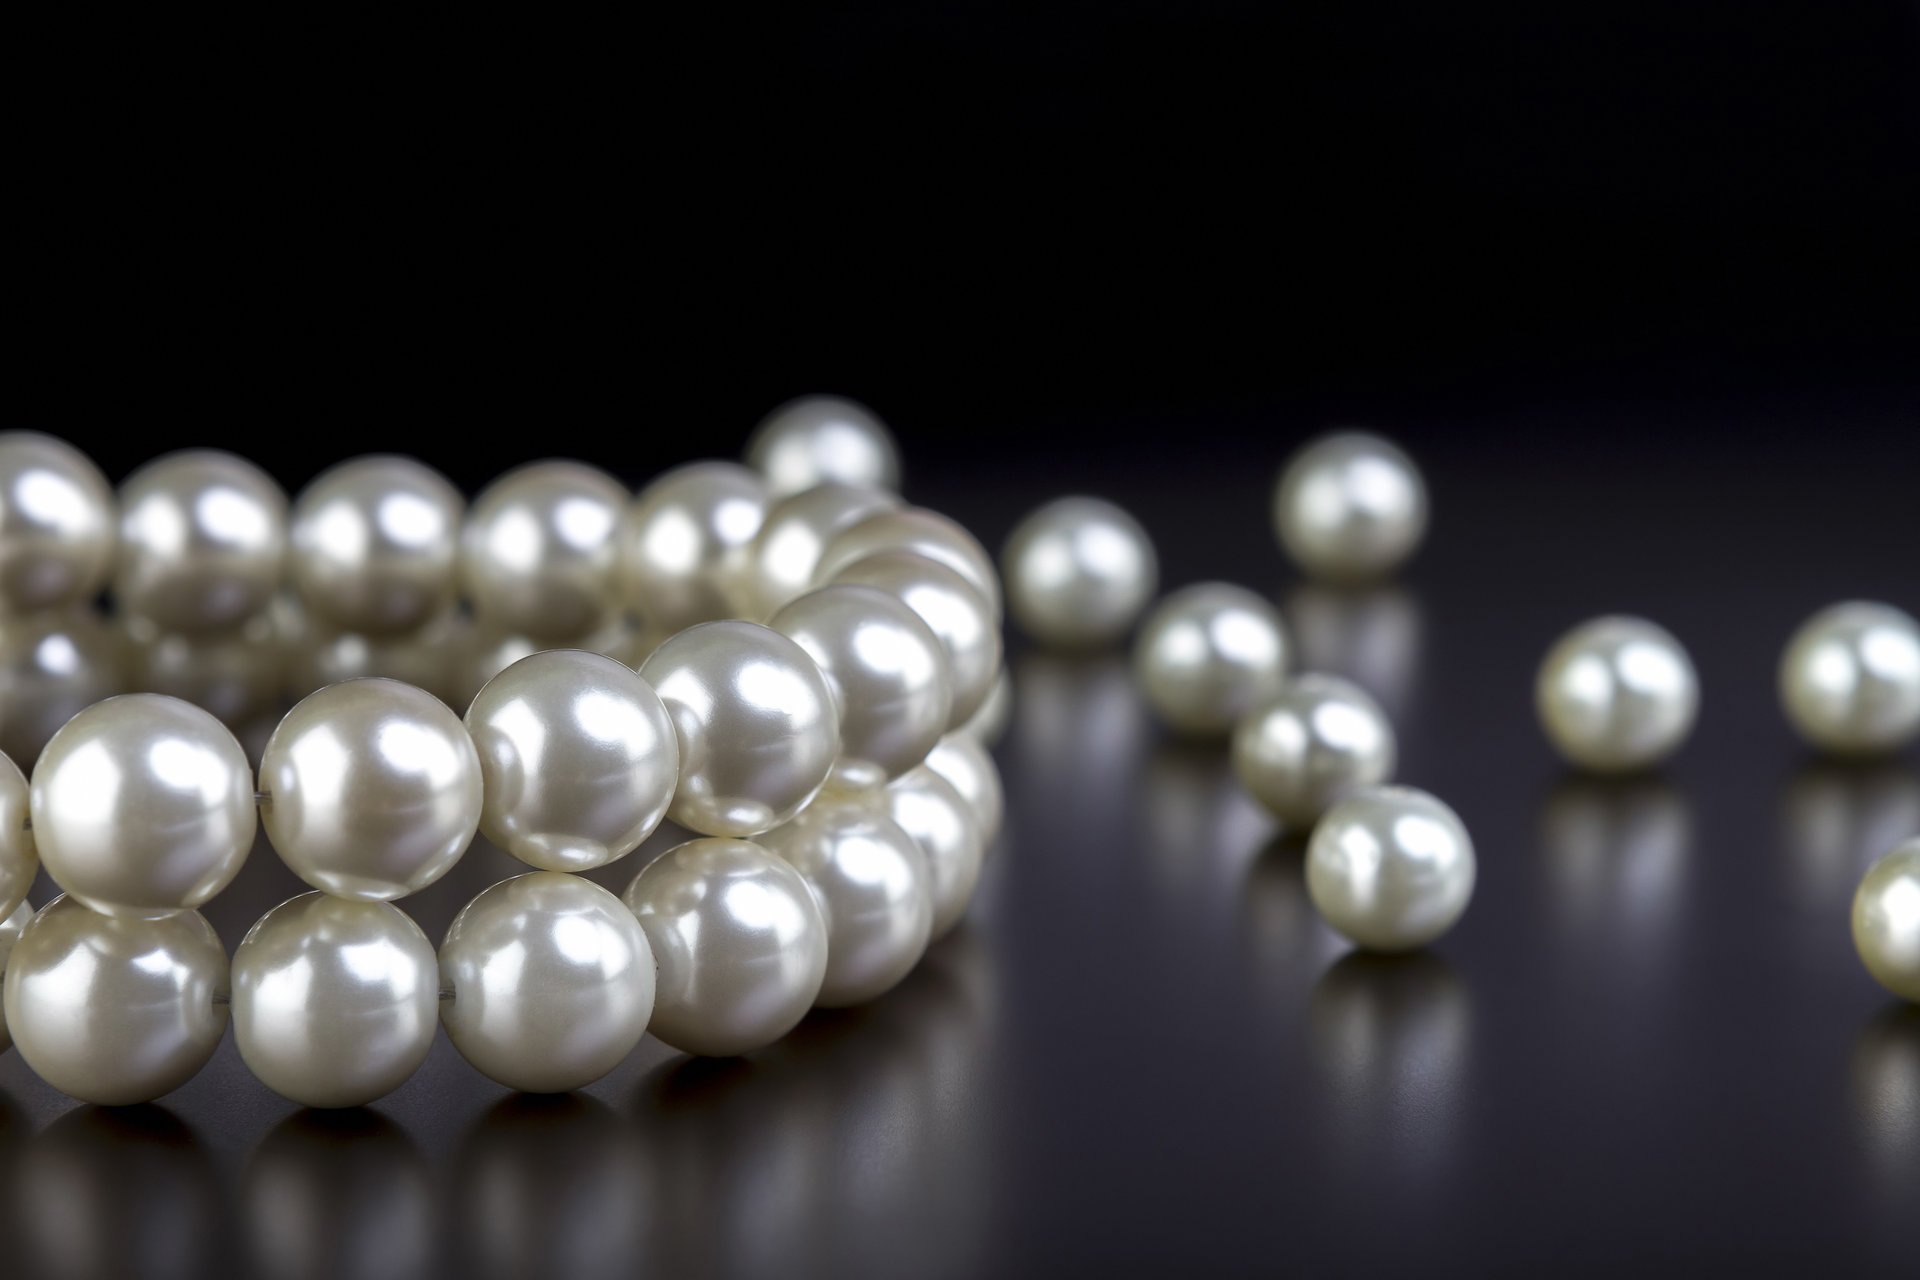 color, shape, and luster-quality of a pearl